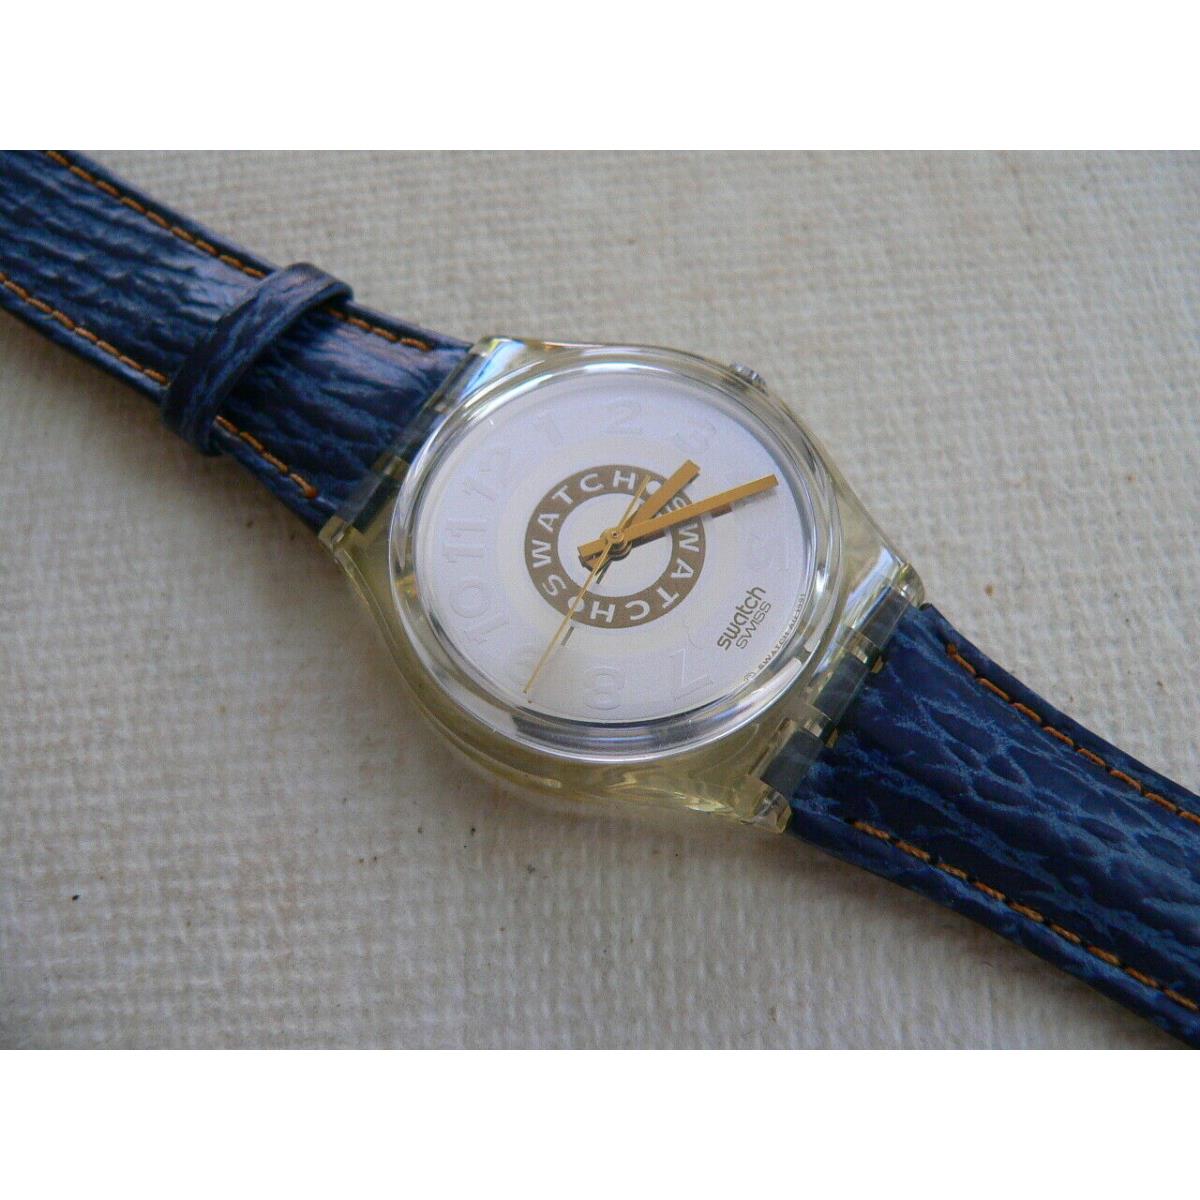 Swatch watch  - Silver Dial, Blue Band 0